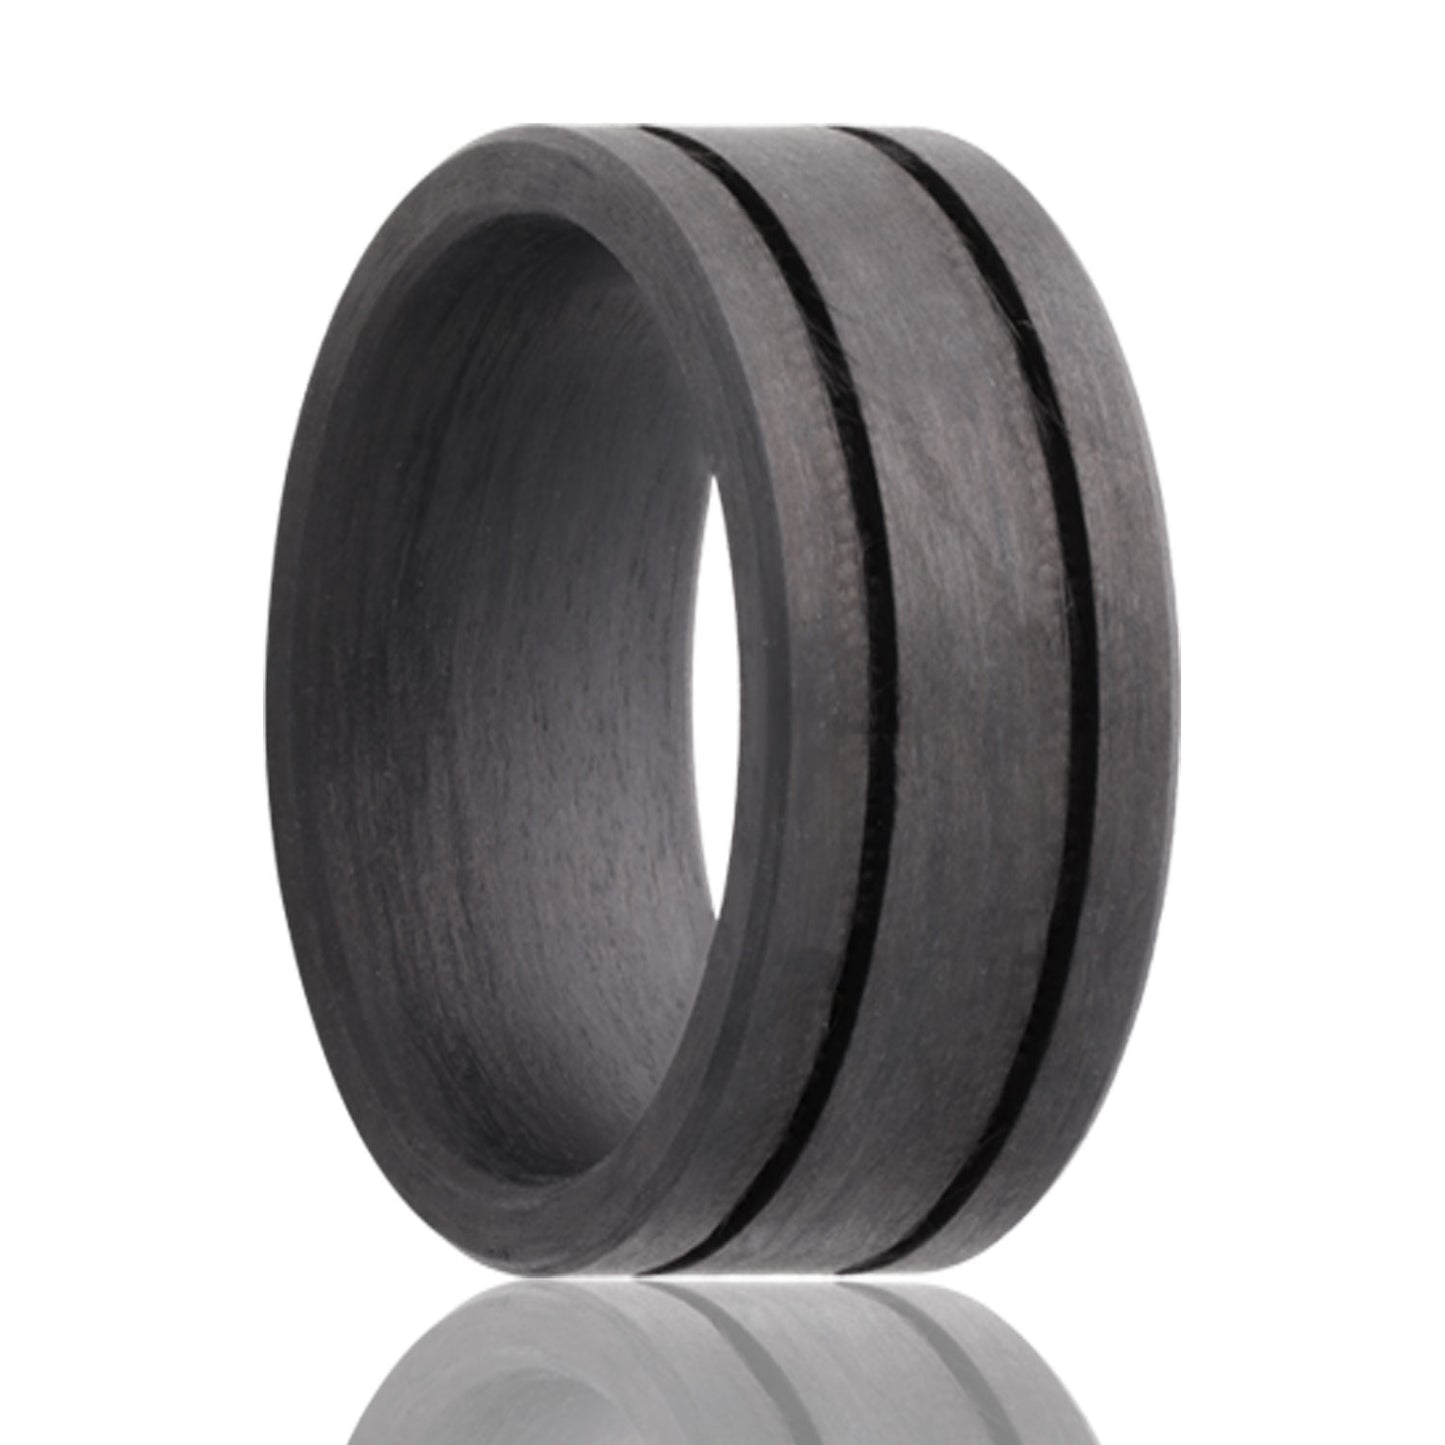 A dual grooved carbon fiber men's wedding band displayed on a neutral white background.